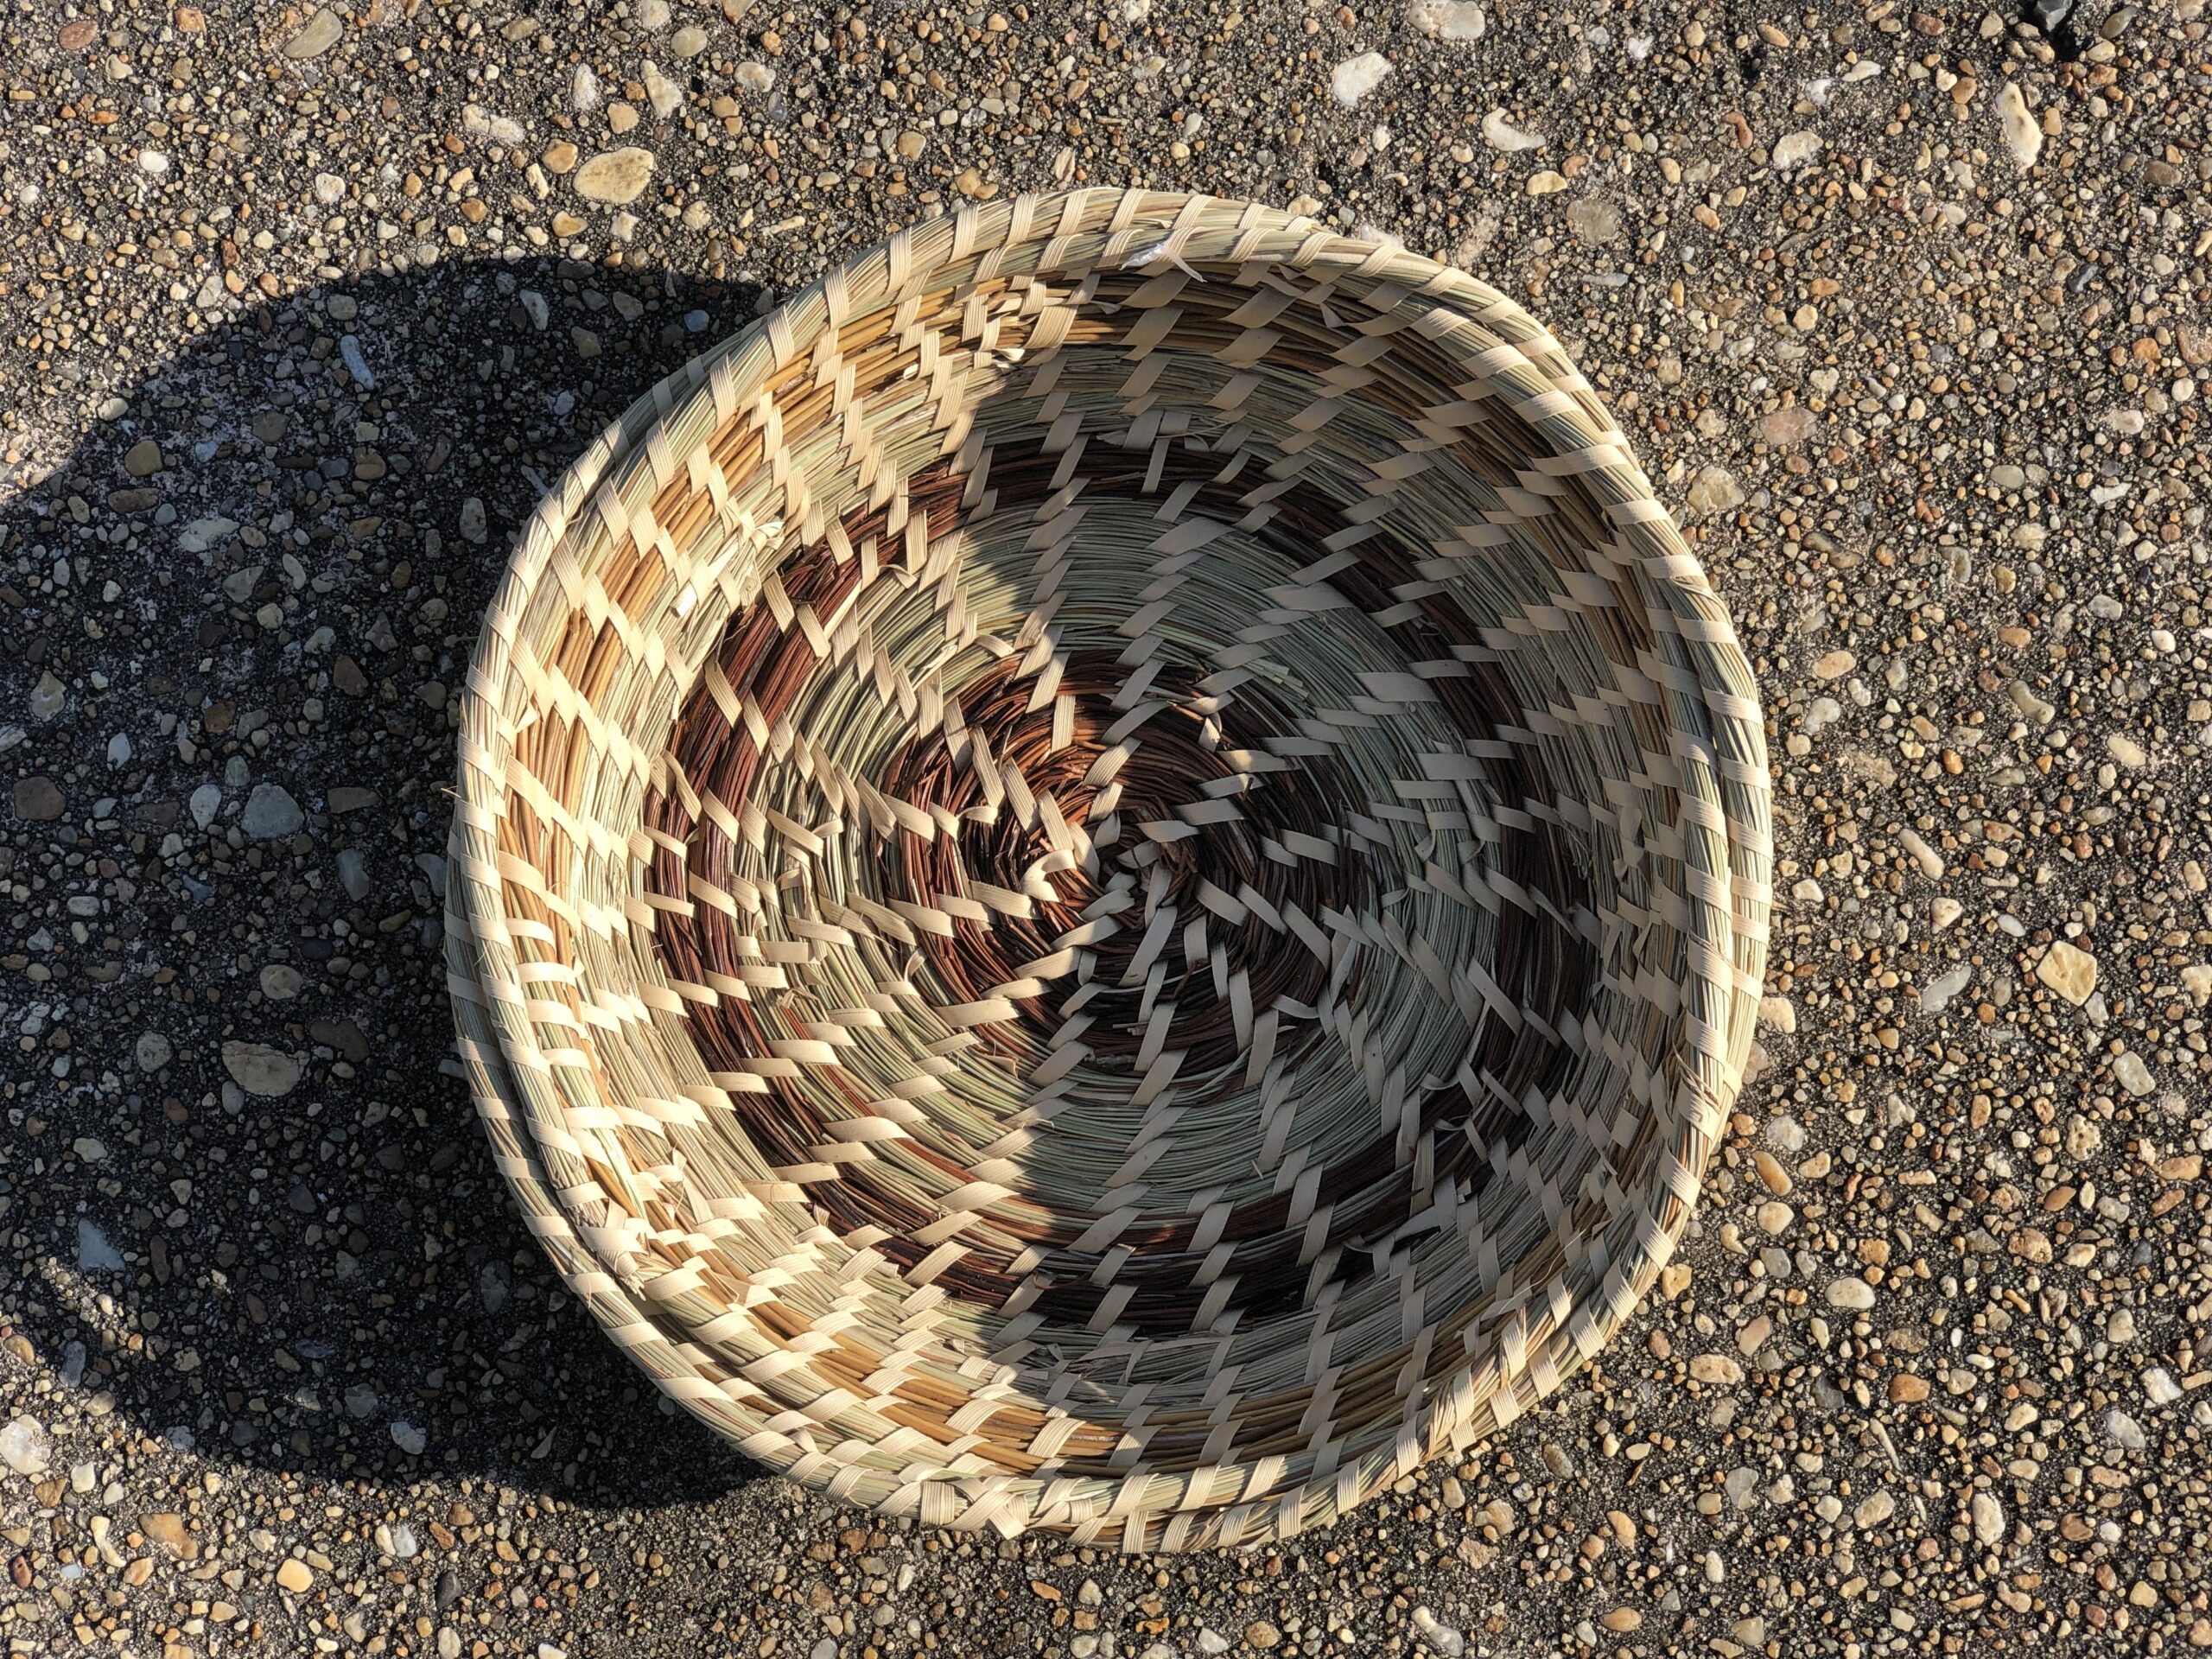 Coiled sweetgrass basket in different tones of buff, green, and brown, seen from above against an asphalt surface